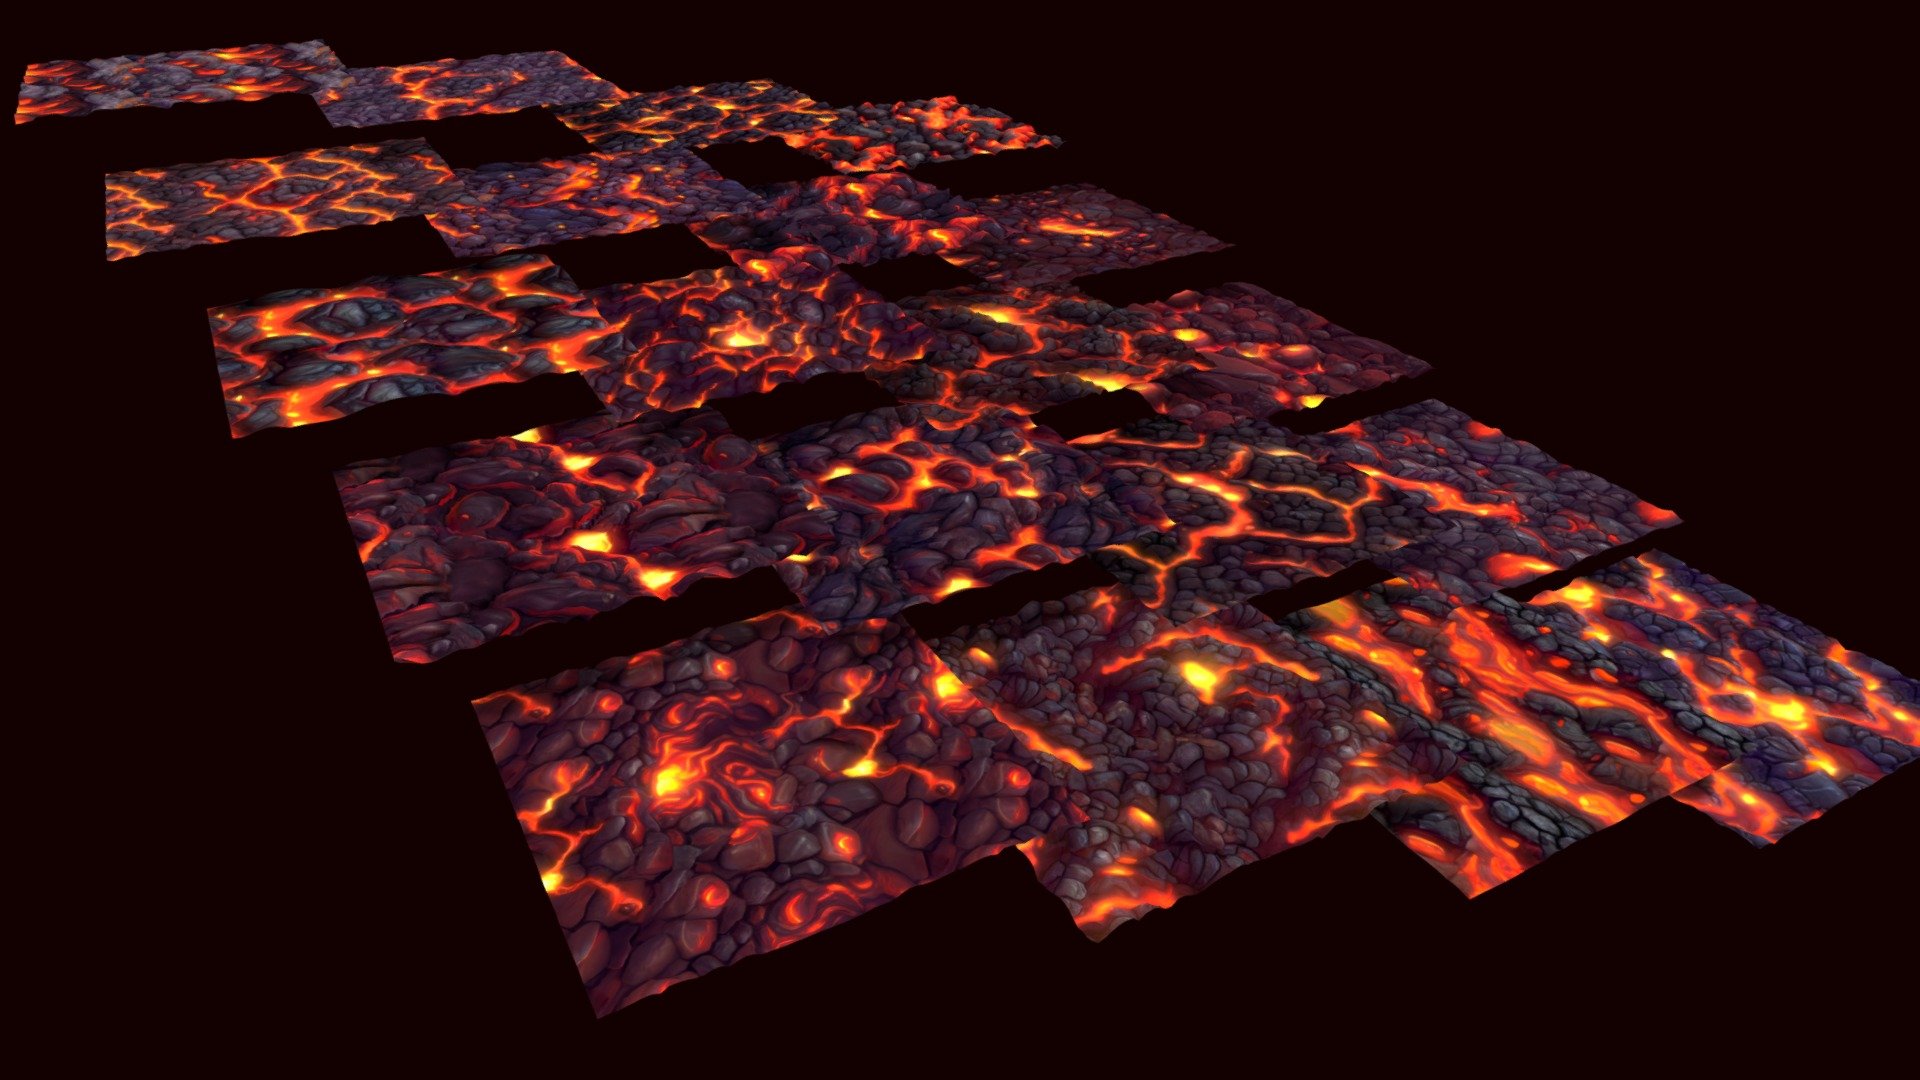 Add some lava and magma into your levels!
The pack also comes with many emissive textures, to add the appearance of a glowing hot lava.

This package also has 20 heightmaps + tesselation shader, to give depth. And to help with height-blending if you use it.
Textures were manually crafted to be tileable, meaning they will have no seams.




2048 x 2048 size

20 Color Textures (tileable)

20 Height Textures (tileable)

20 Normals Textures (tileable)

20 Emission Textures (tileable)

20 Ambient-occlusion Textures (tileable)

Hand Painted

Mobile and PBR ready

Help us by rating and commenting, this will motivate us to create more assets and improve :) - Lava and Rocks: 20 TEXTURES - Buy Royalty Free 3D model by Texture Me (@textureme) 3d model